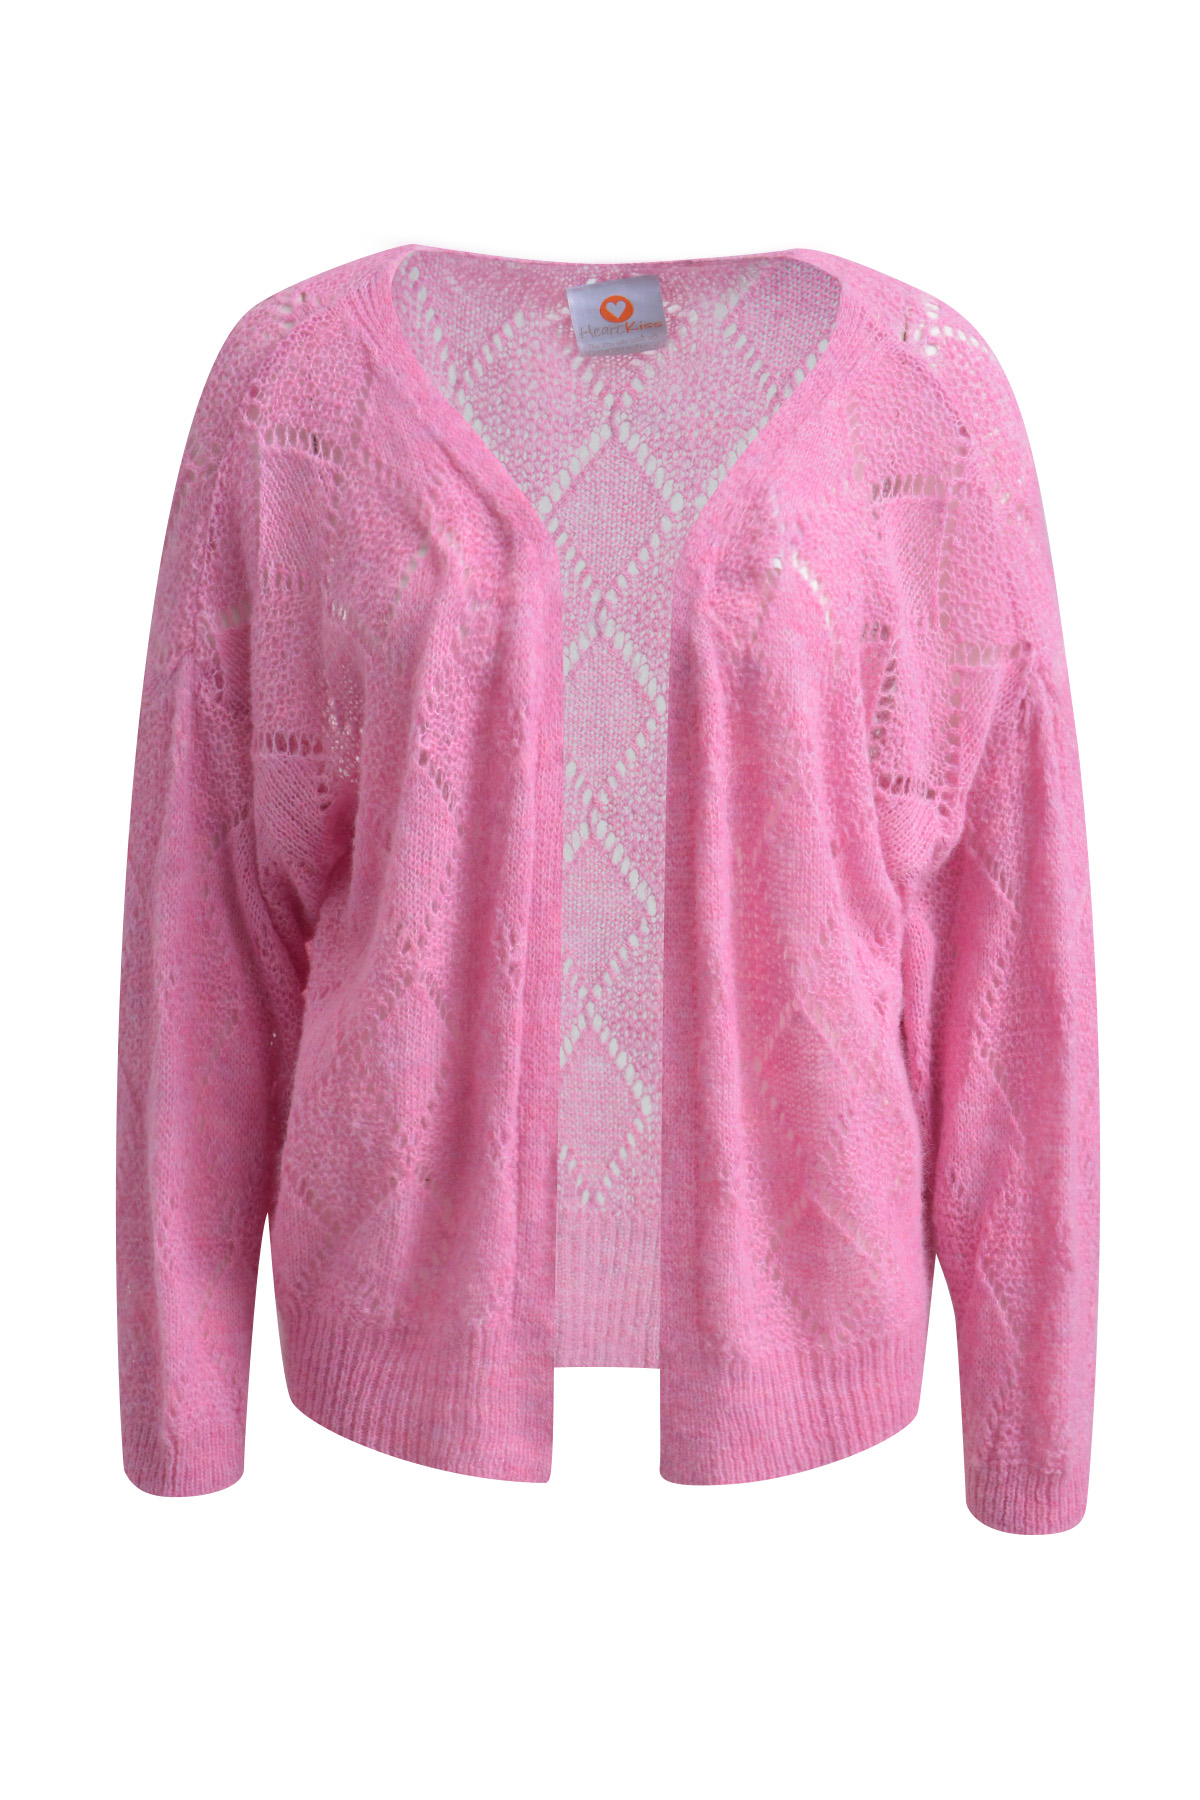 HeartKiss Cardigans